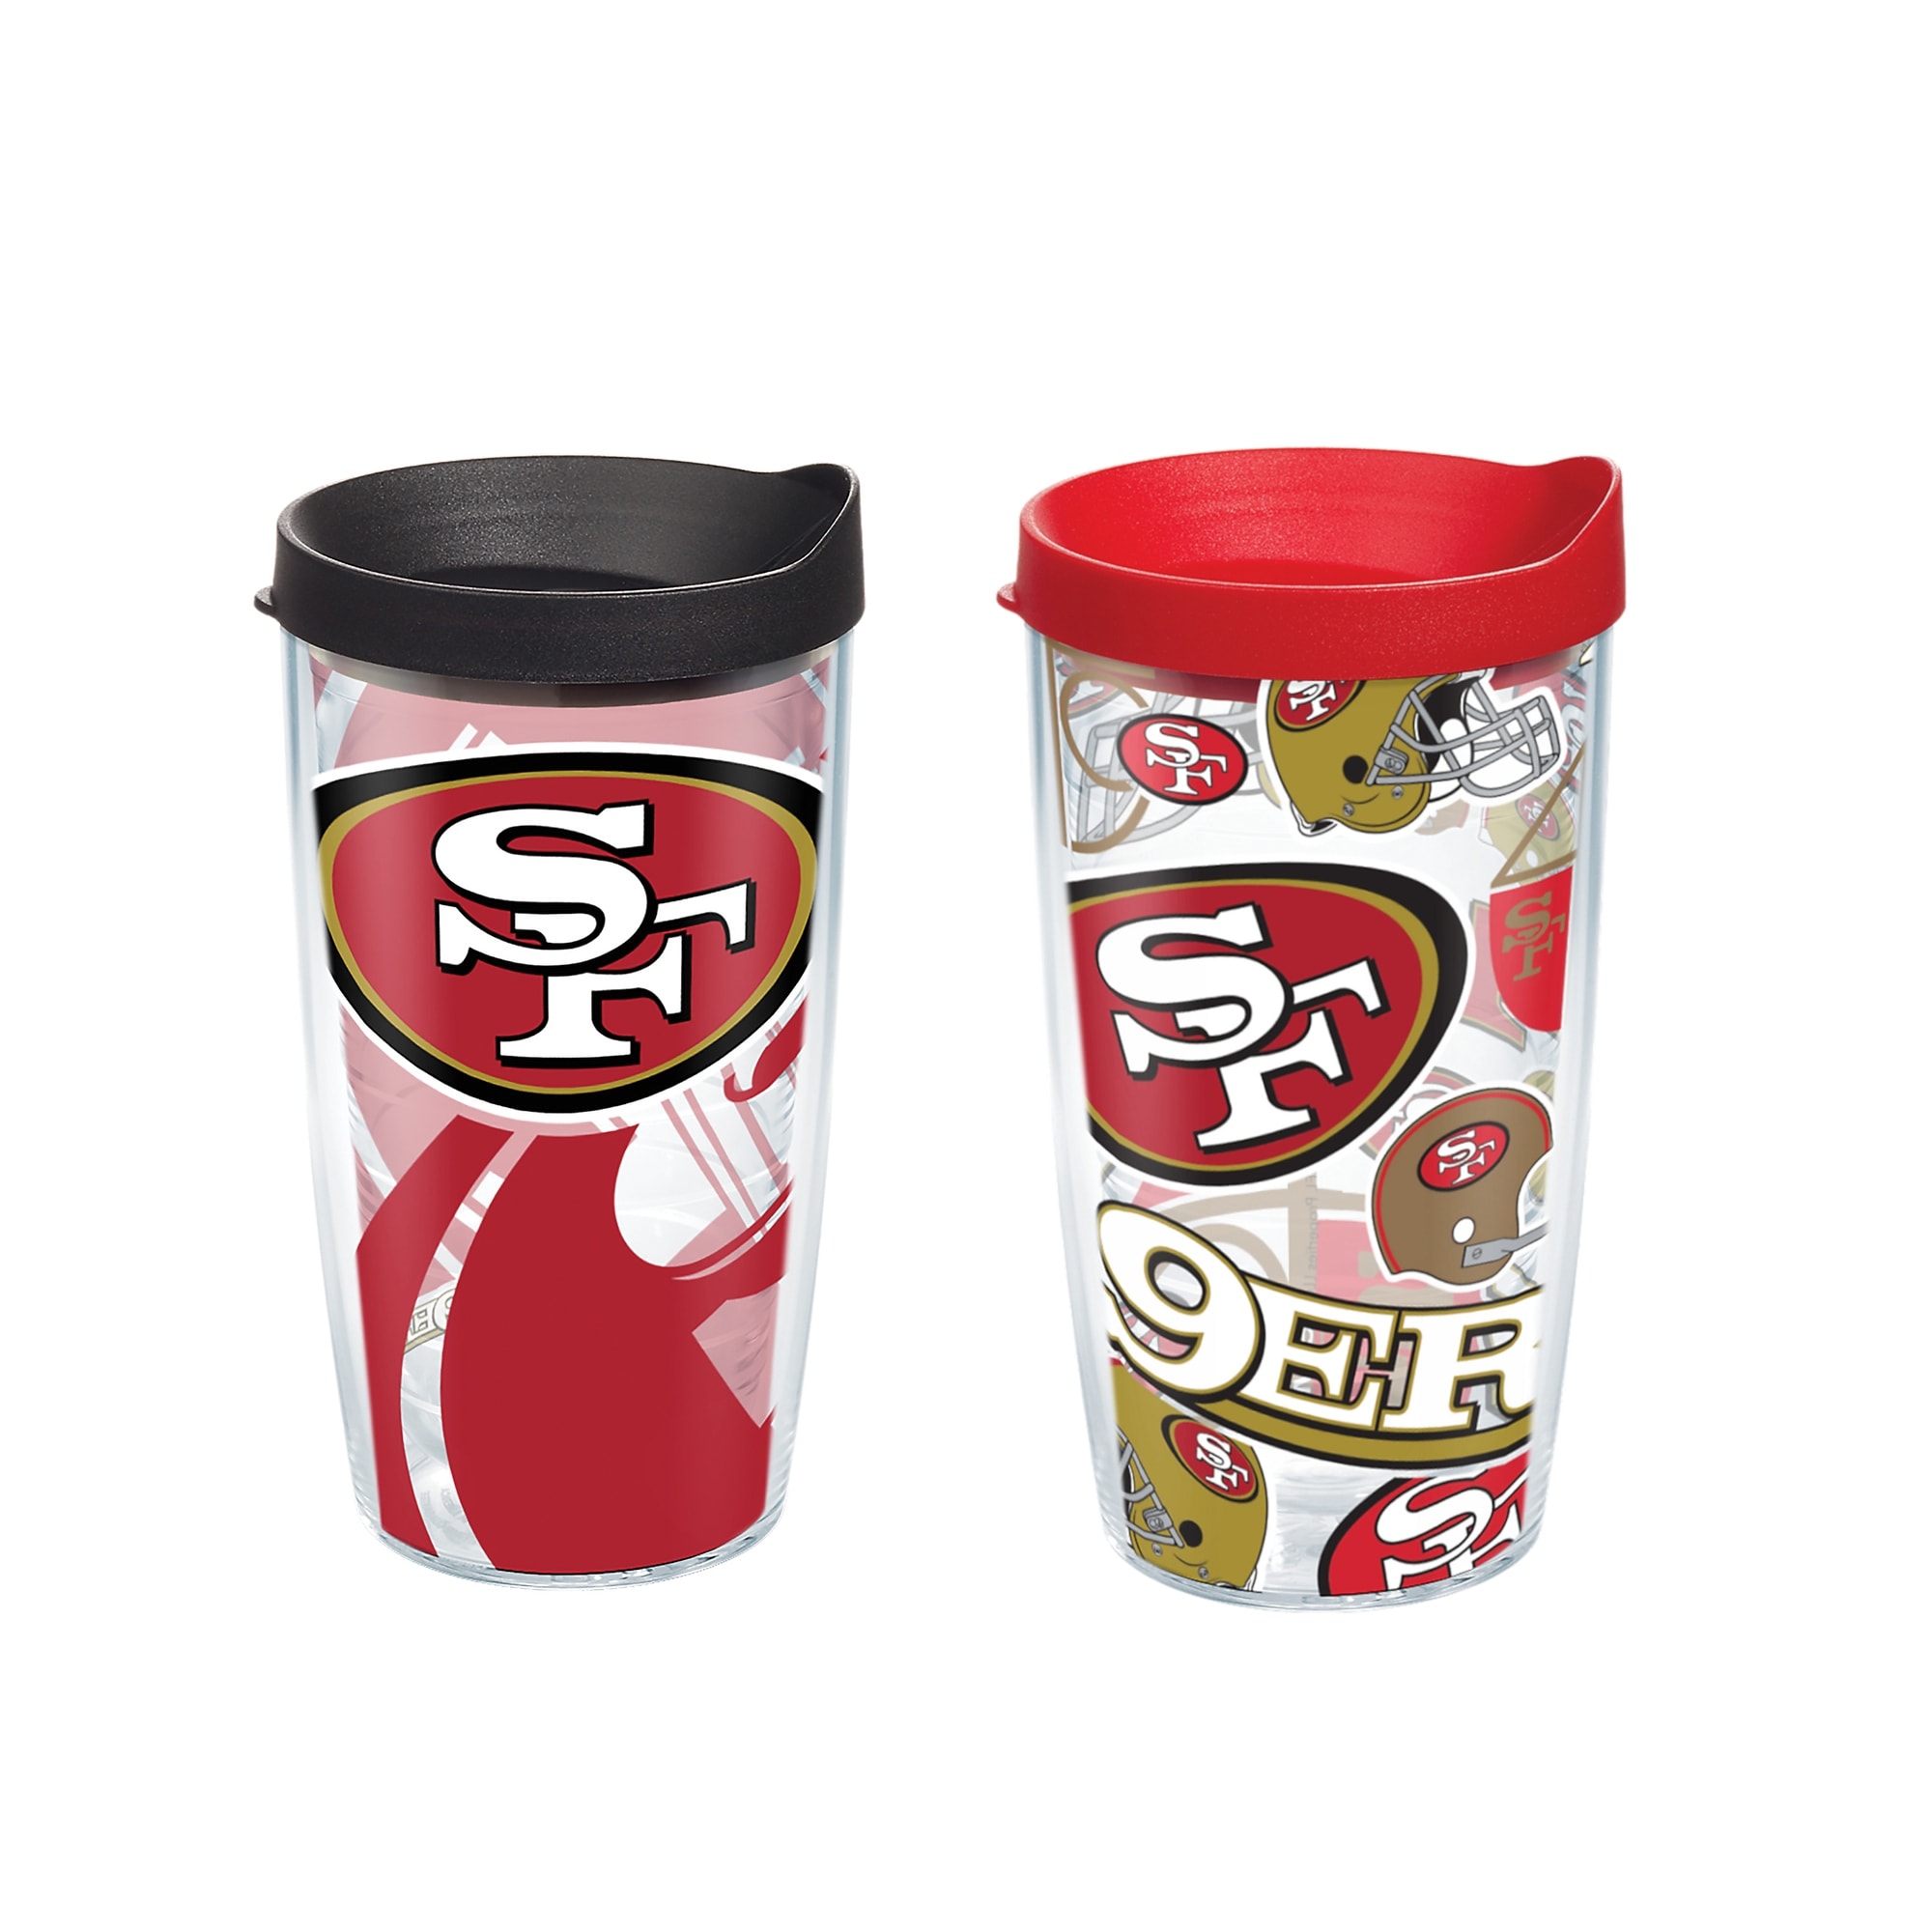 https://ak1.ostkcdn.com/images/products/is/images/direct/68866a99e67095abbe0ecab08c61411b1ab6c8ef/NFL-San-Francisco-49ers-16-oz-All-Over-and-Genuine-Tumbler-Set-with-lids.jpg